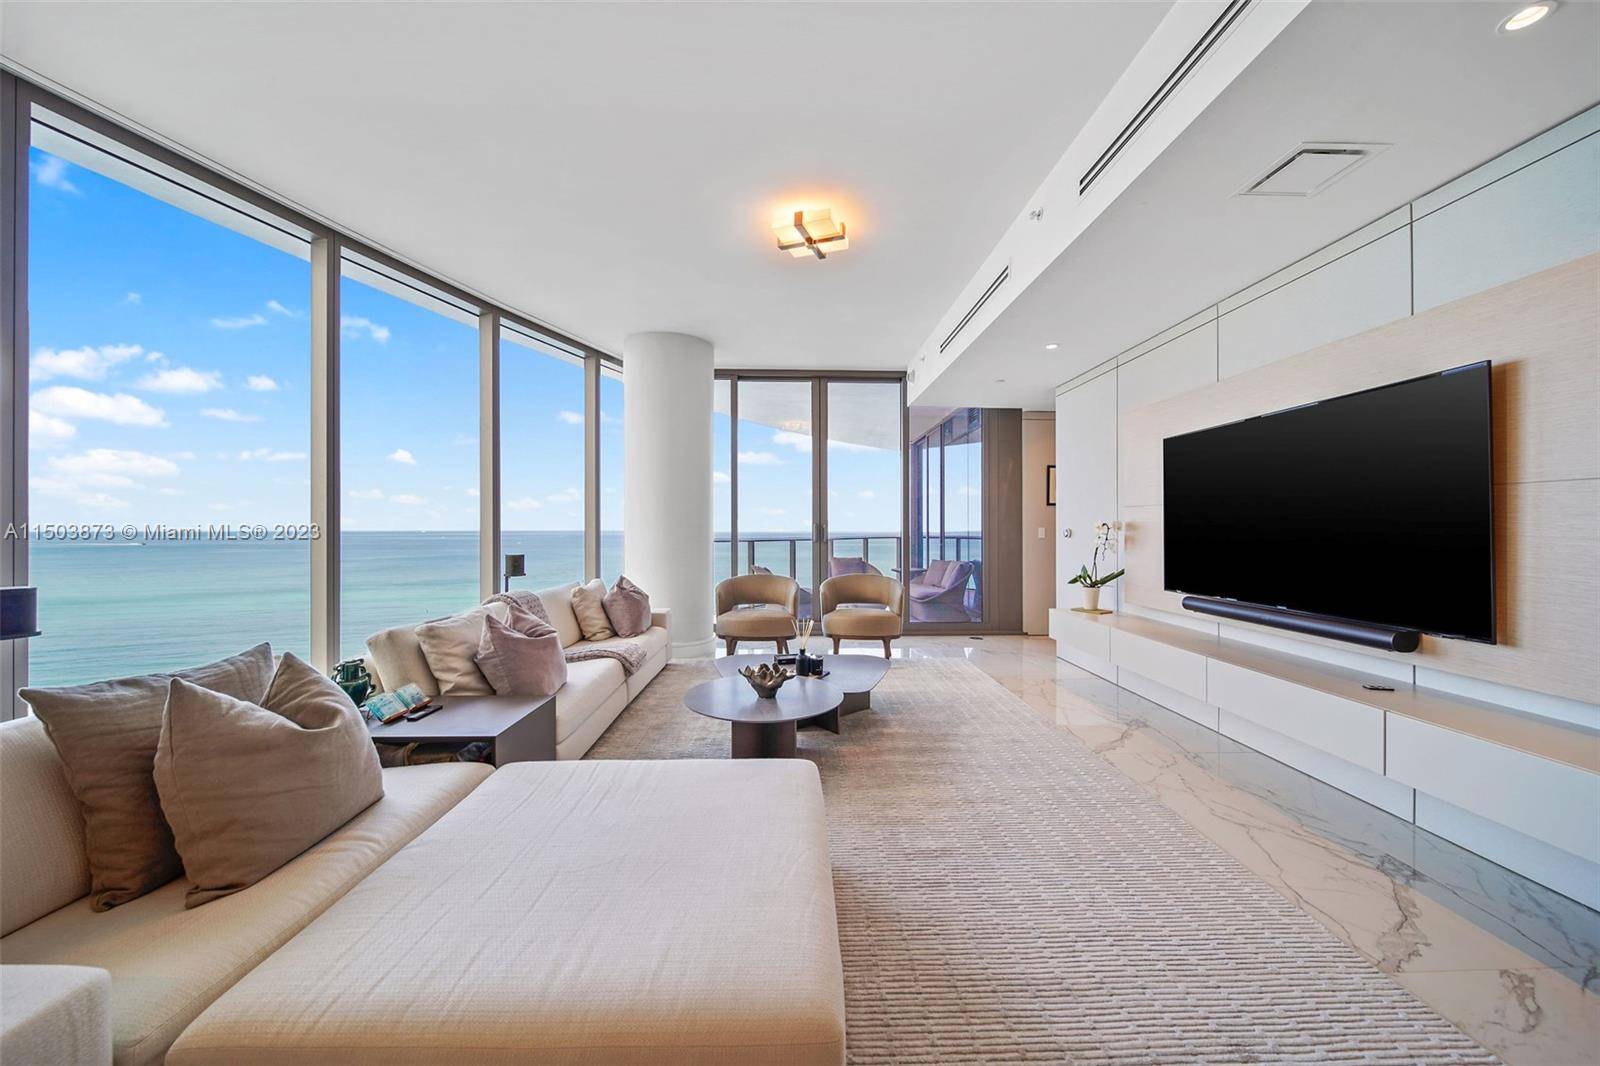 Welcome to the epitome of luxury living at The Ritz Carlton Sunny Isles, where this exquisite flow through 4 bed den 4.